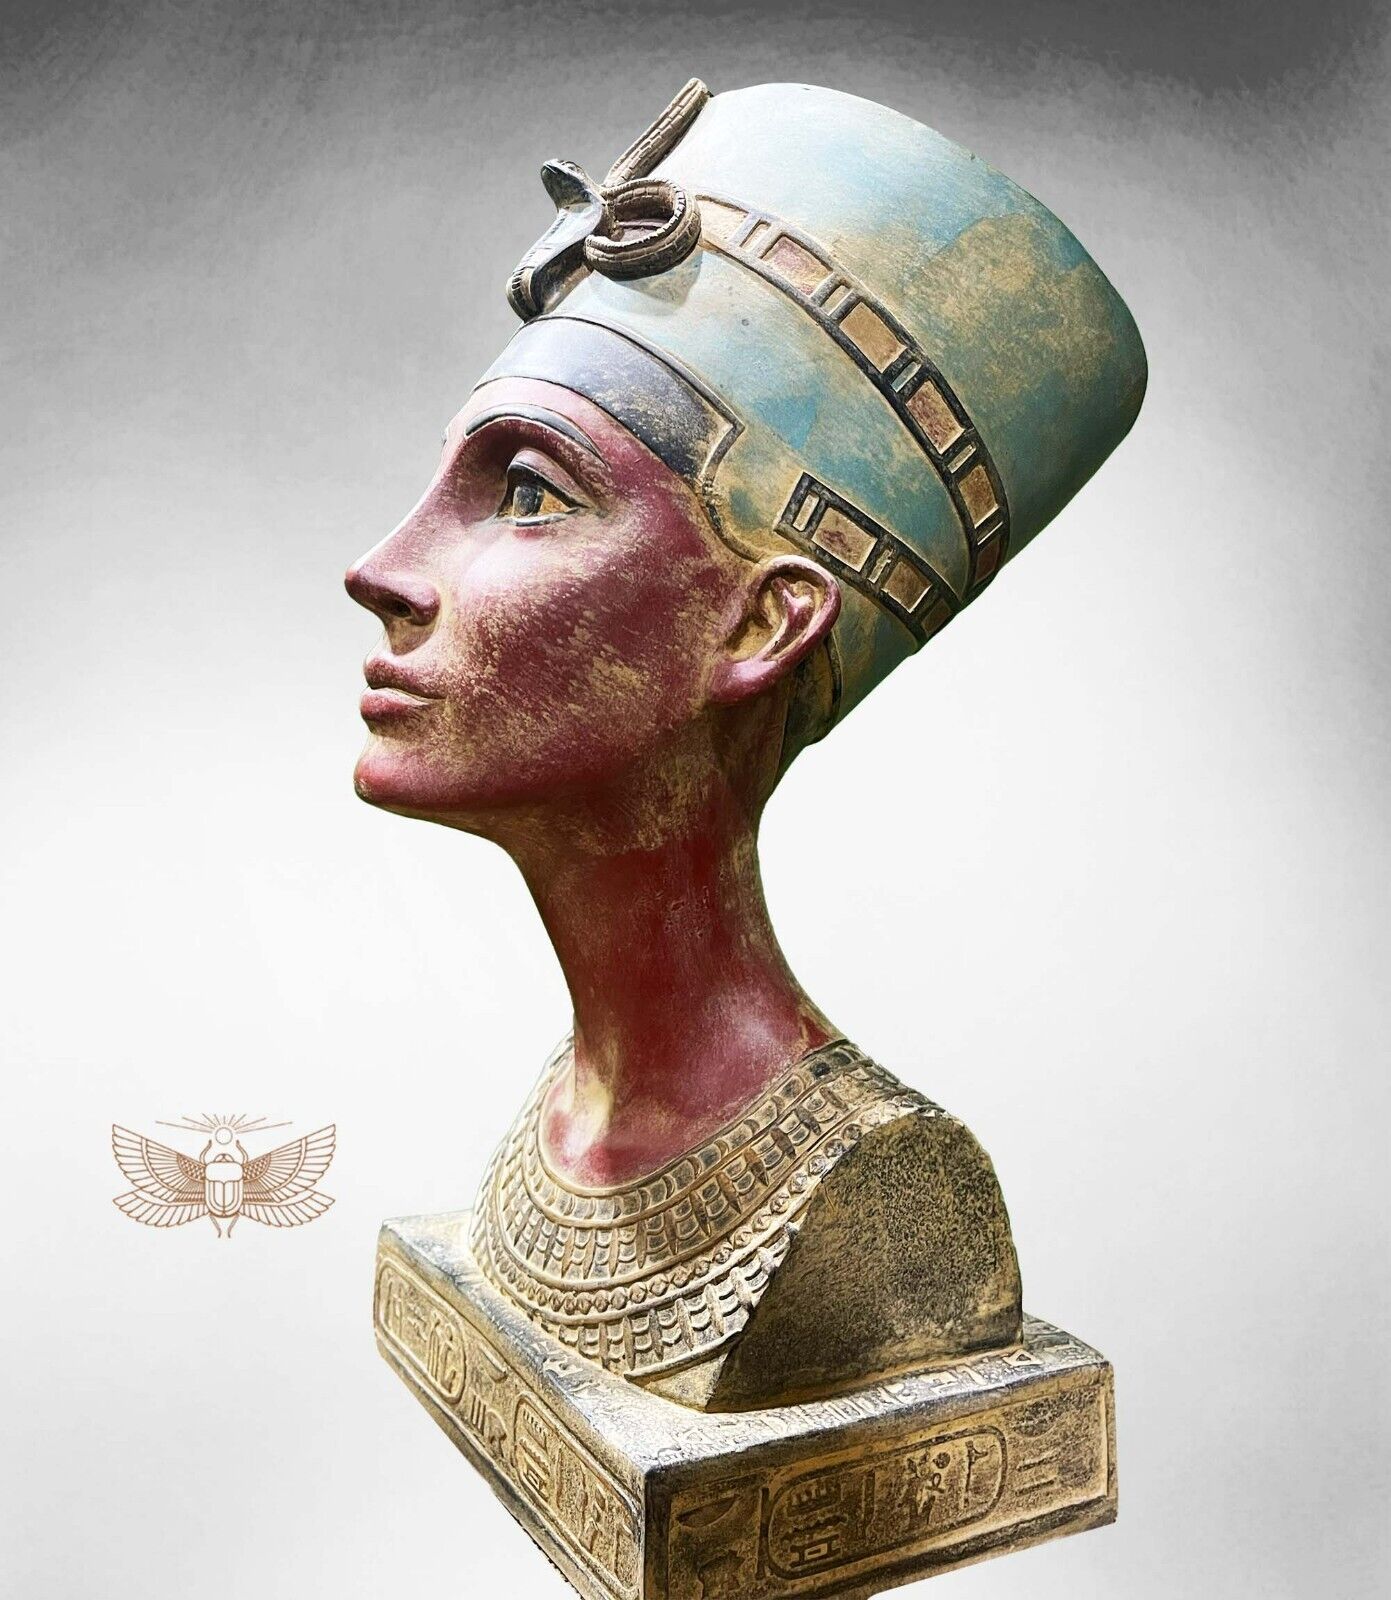 Egyptian Queen Nefertiti - One of a kind made by Egyptian hands